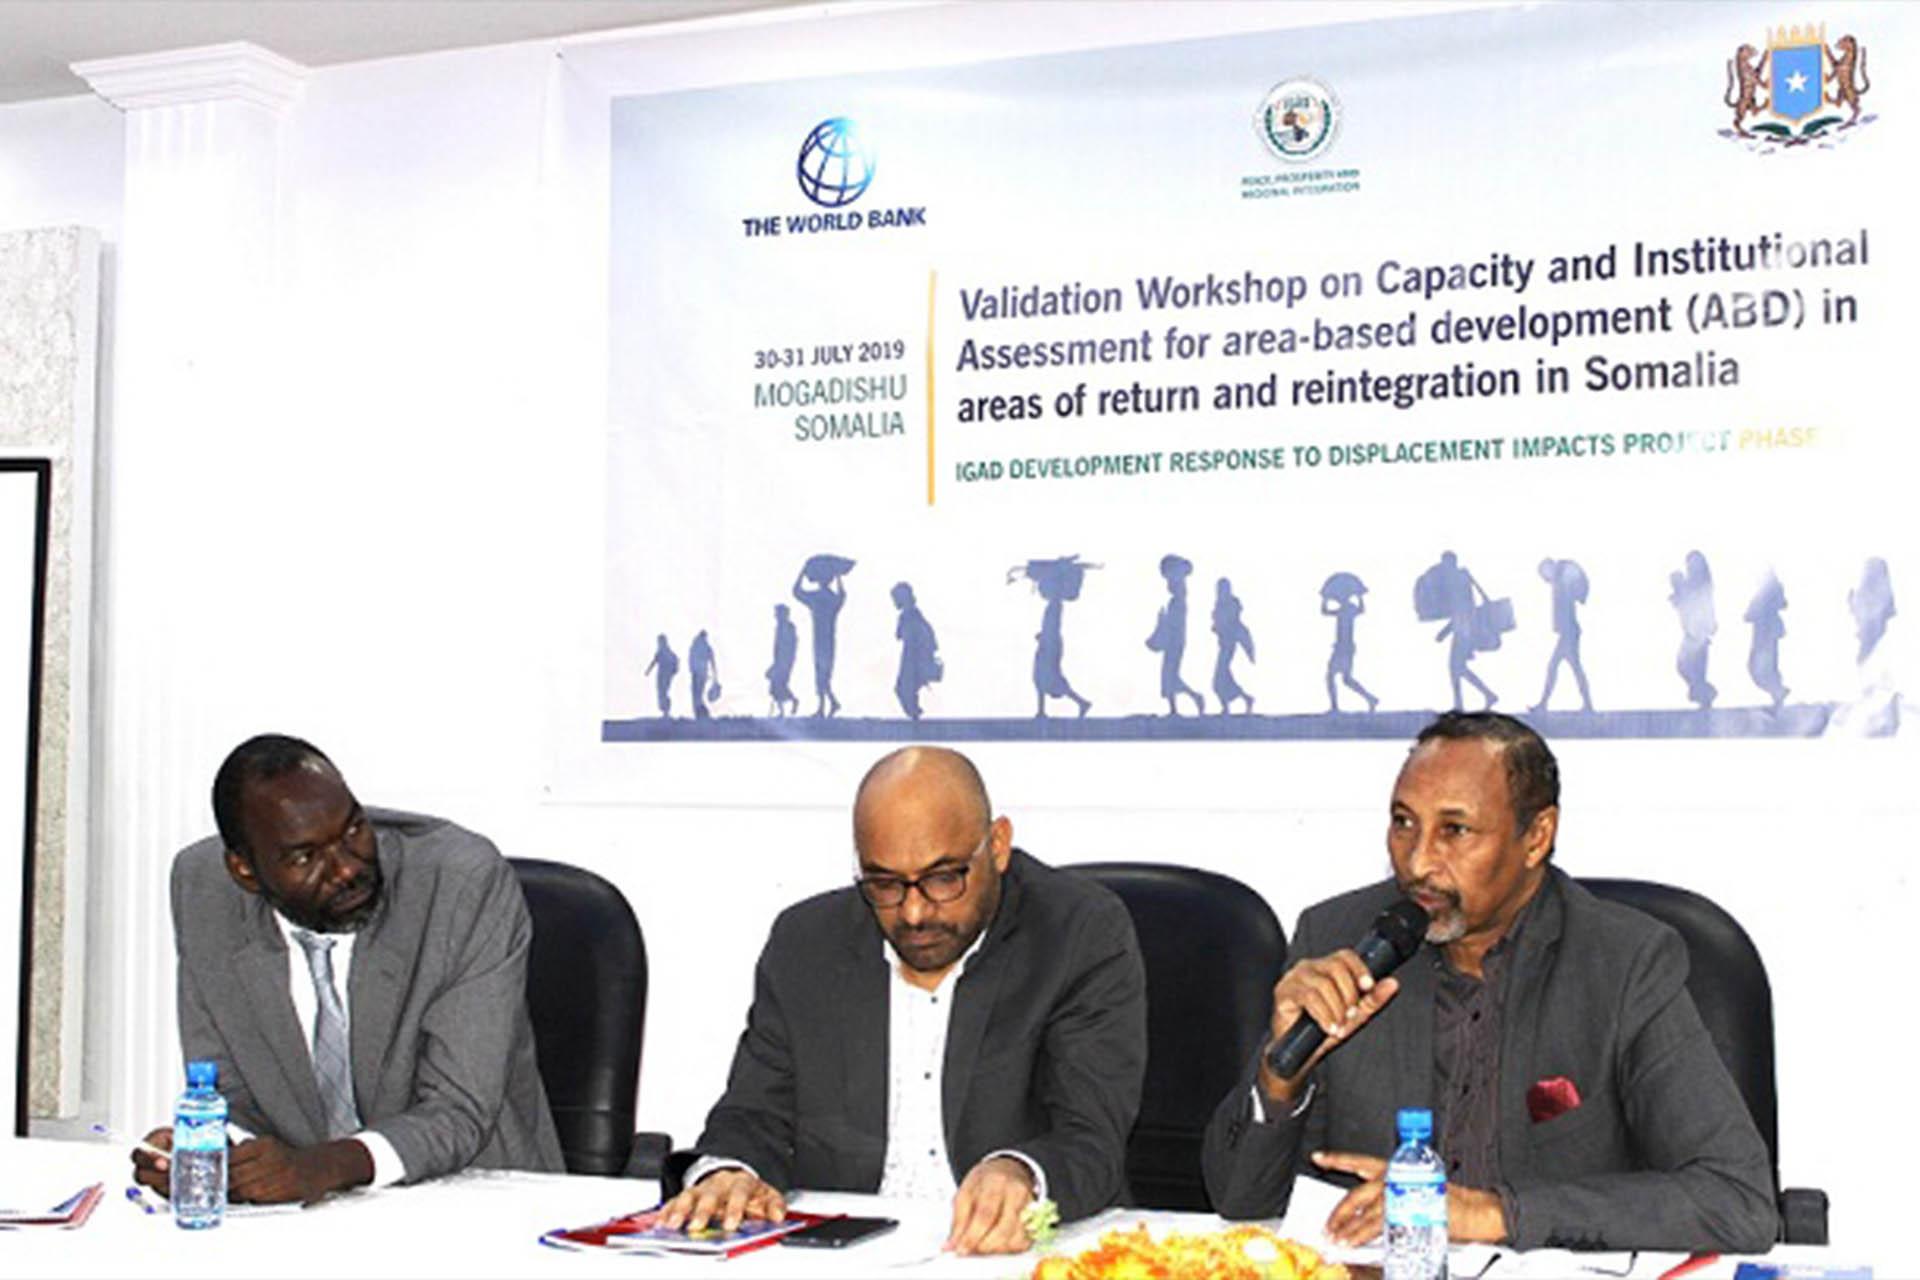 IGAD Facilitates Validation of Assessment on Durable Solutions for Returnees in Somalia